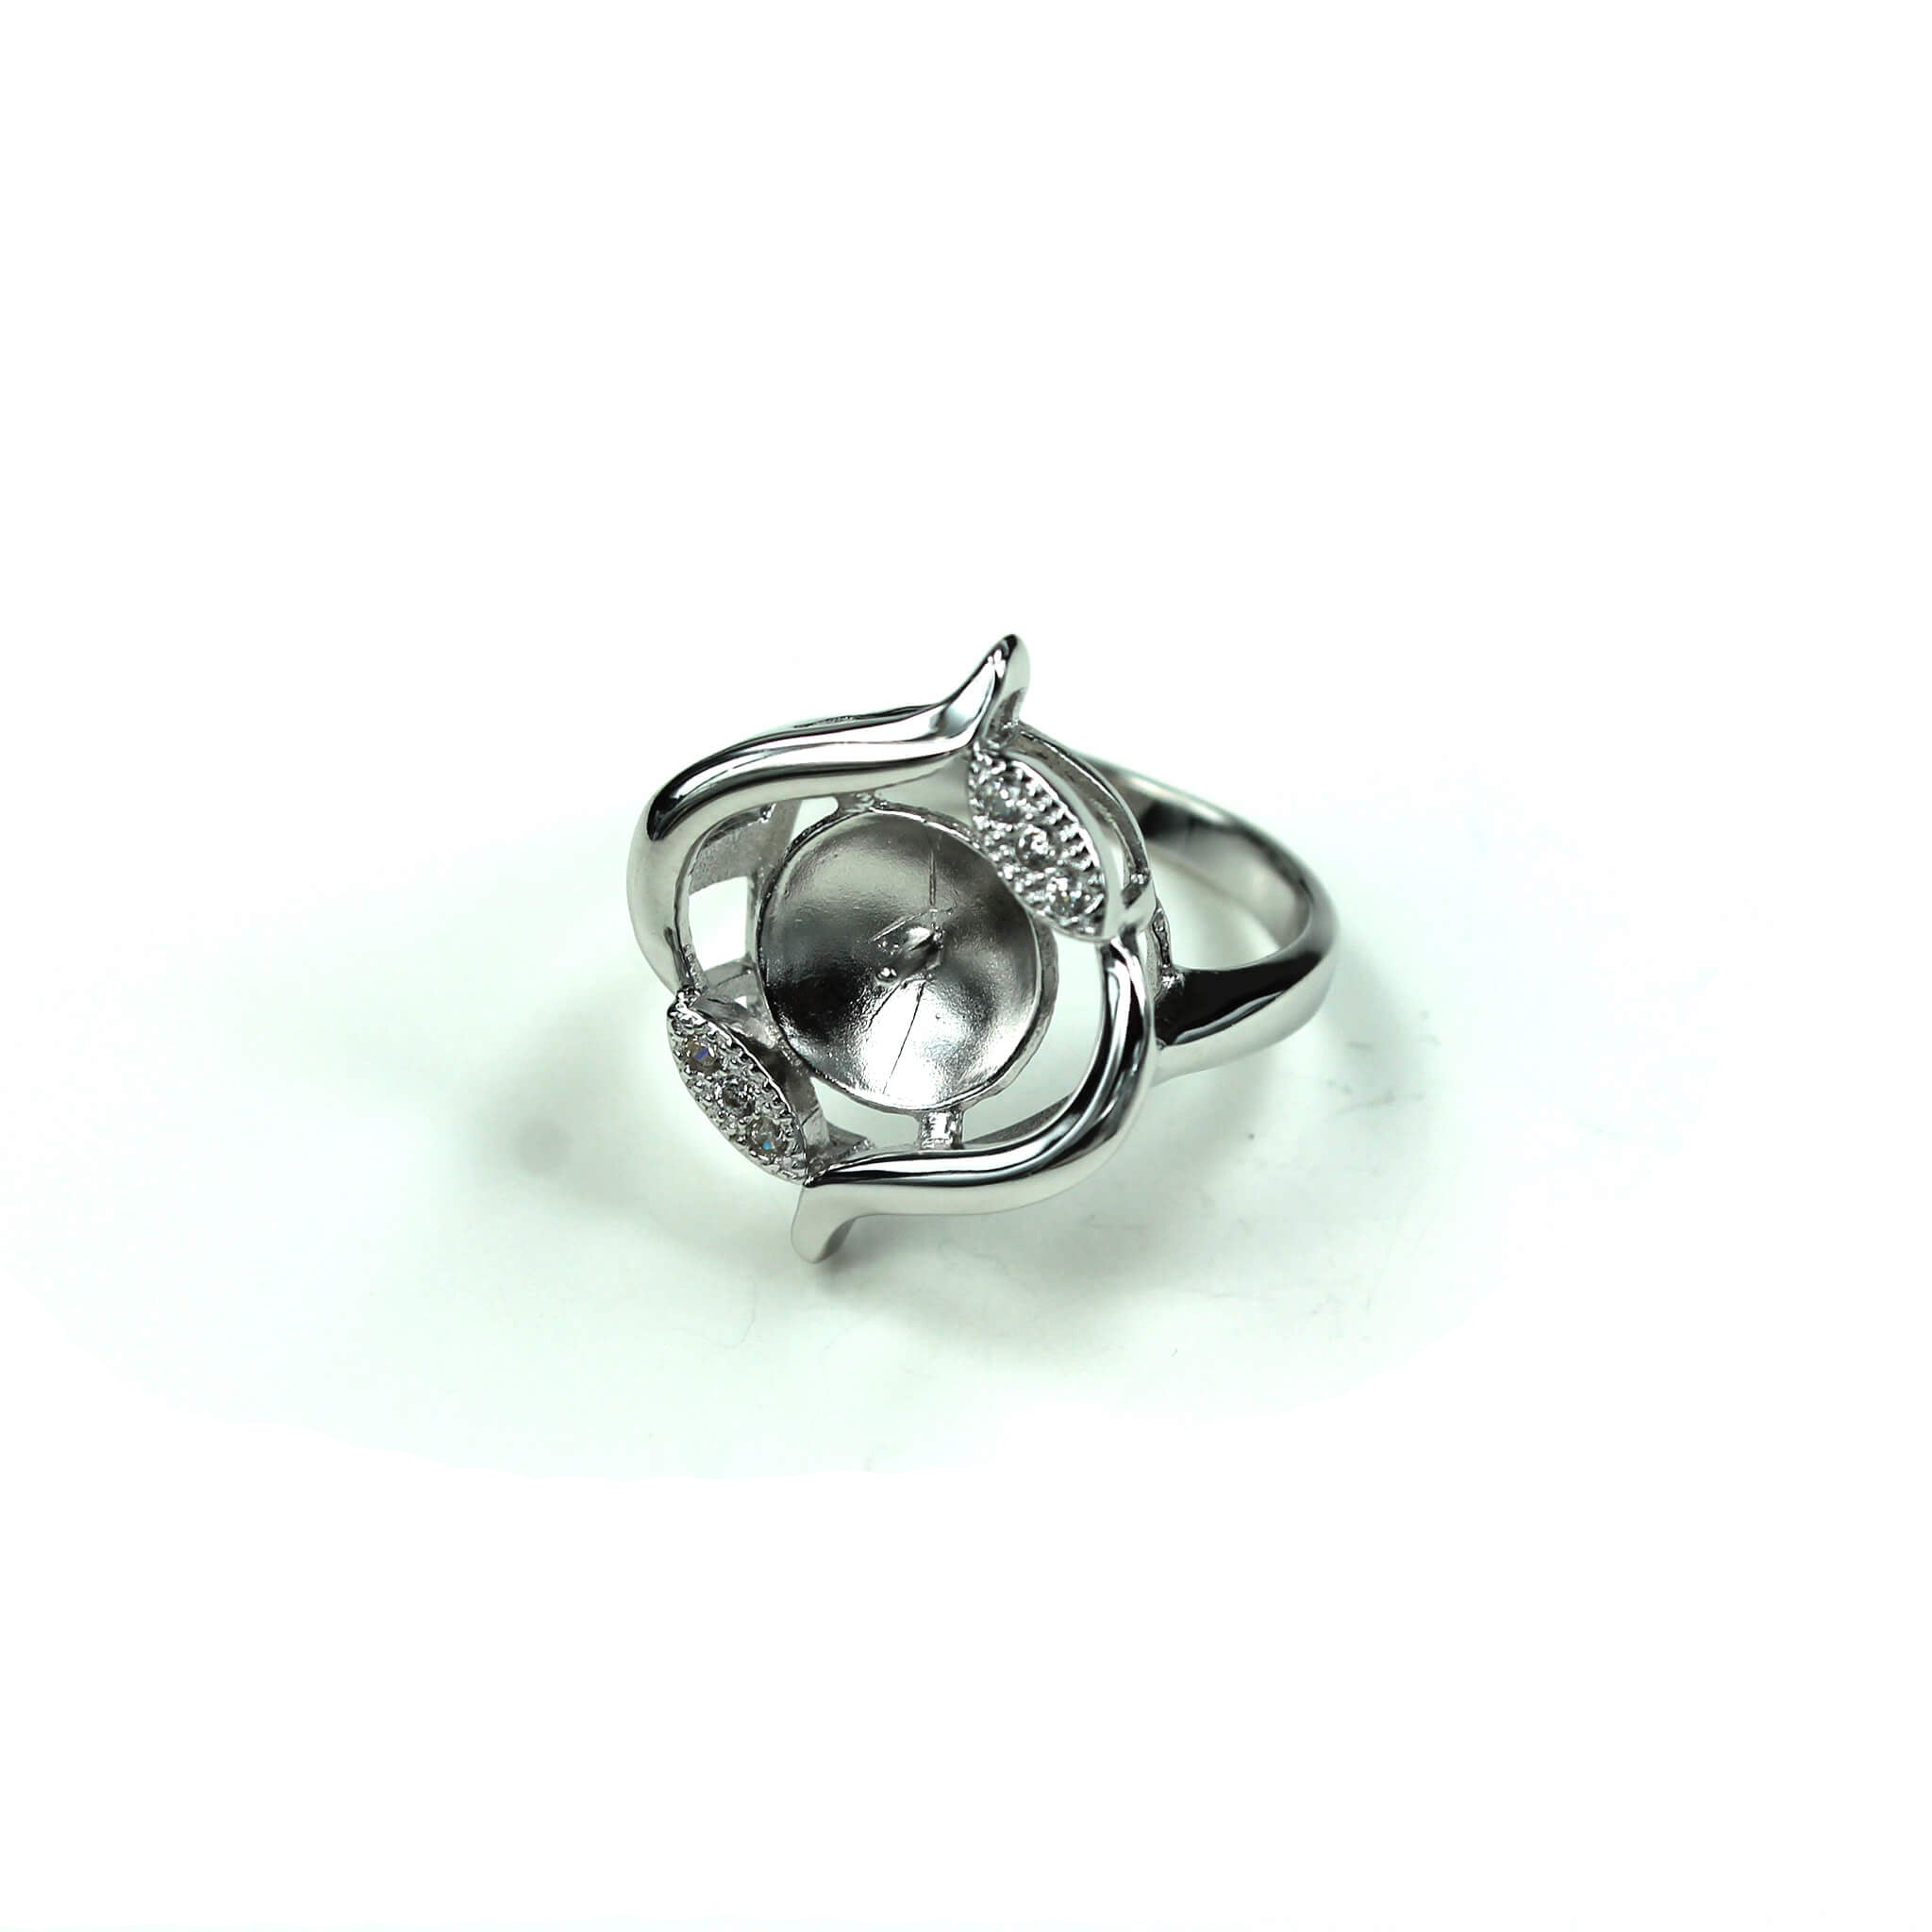 Leaf Ring with Cubic Zirconia Inlays and Cup and Peg Mounting in Sterling Silver 10mm